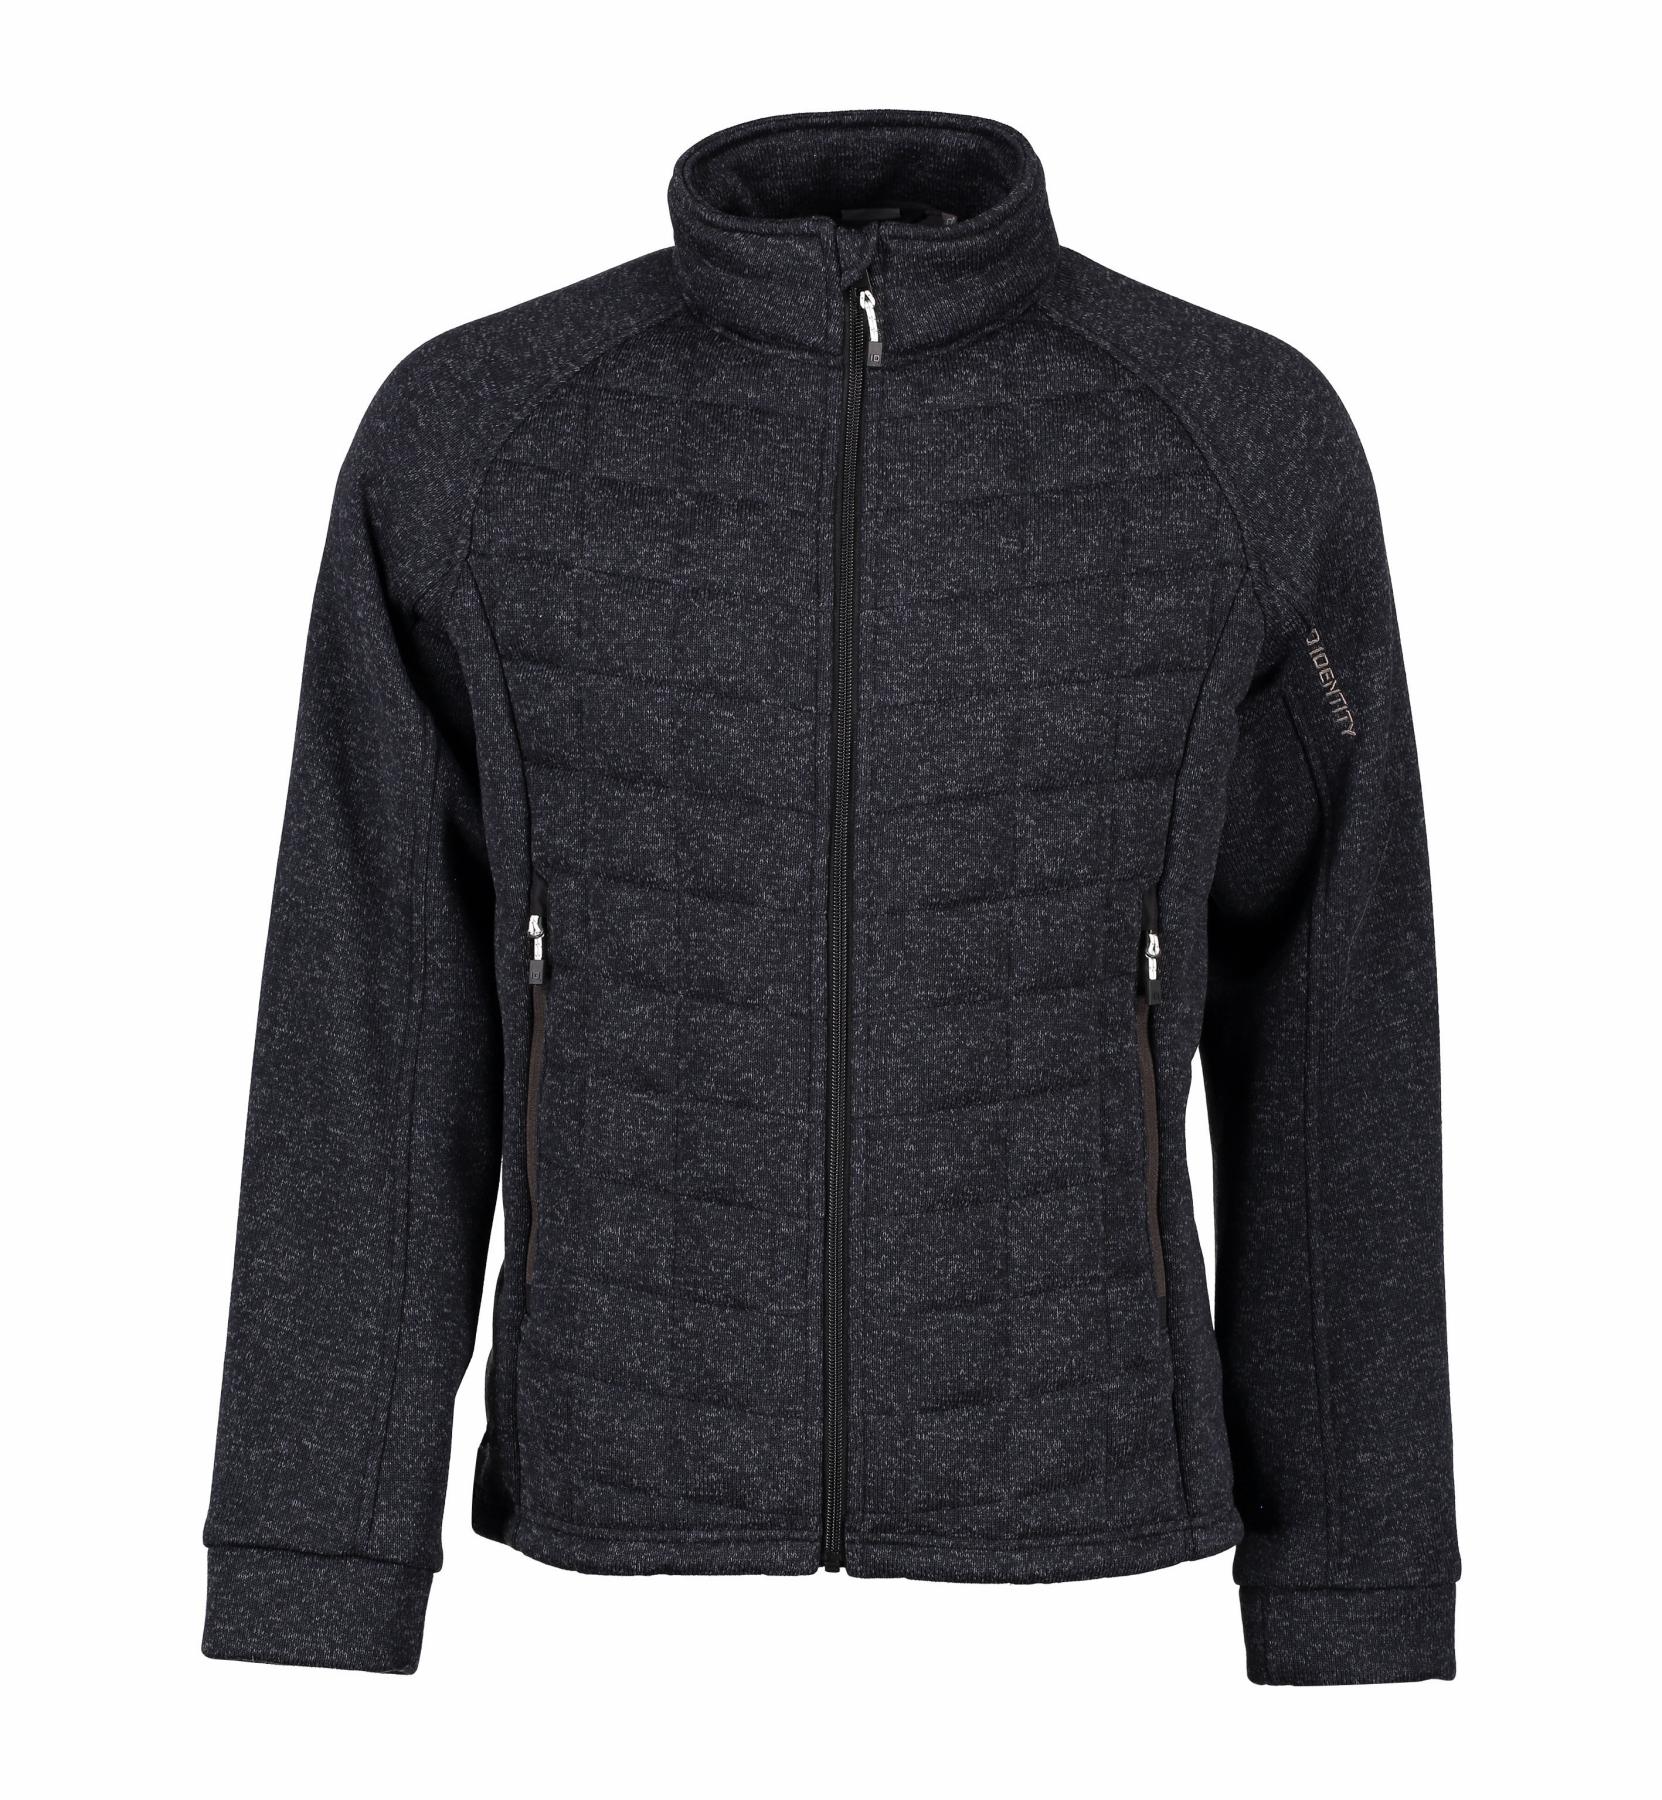 Mens quilted fleece jacket ID Identity® Graphite mottled M